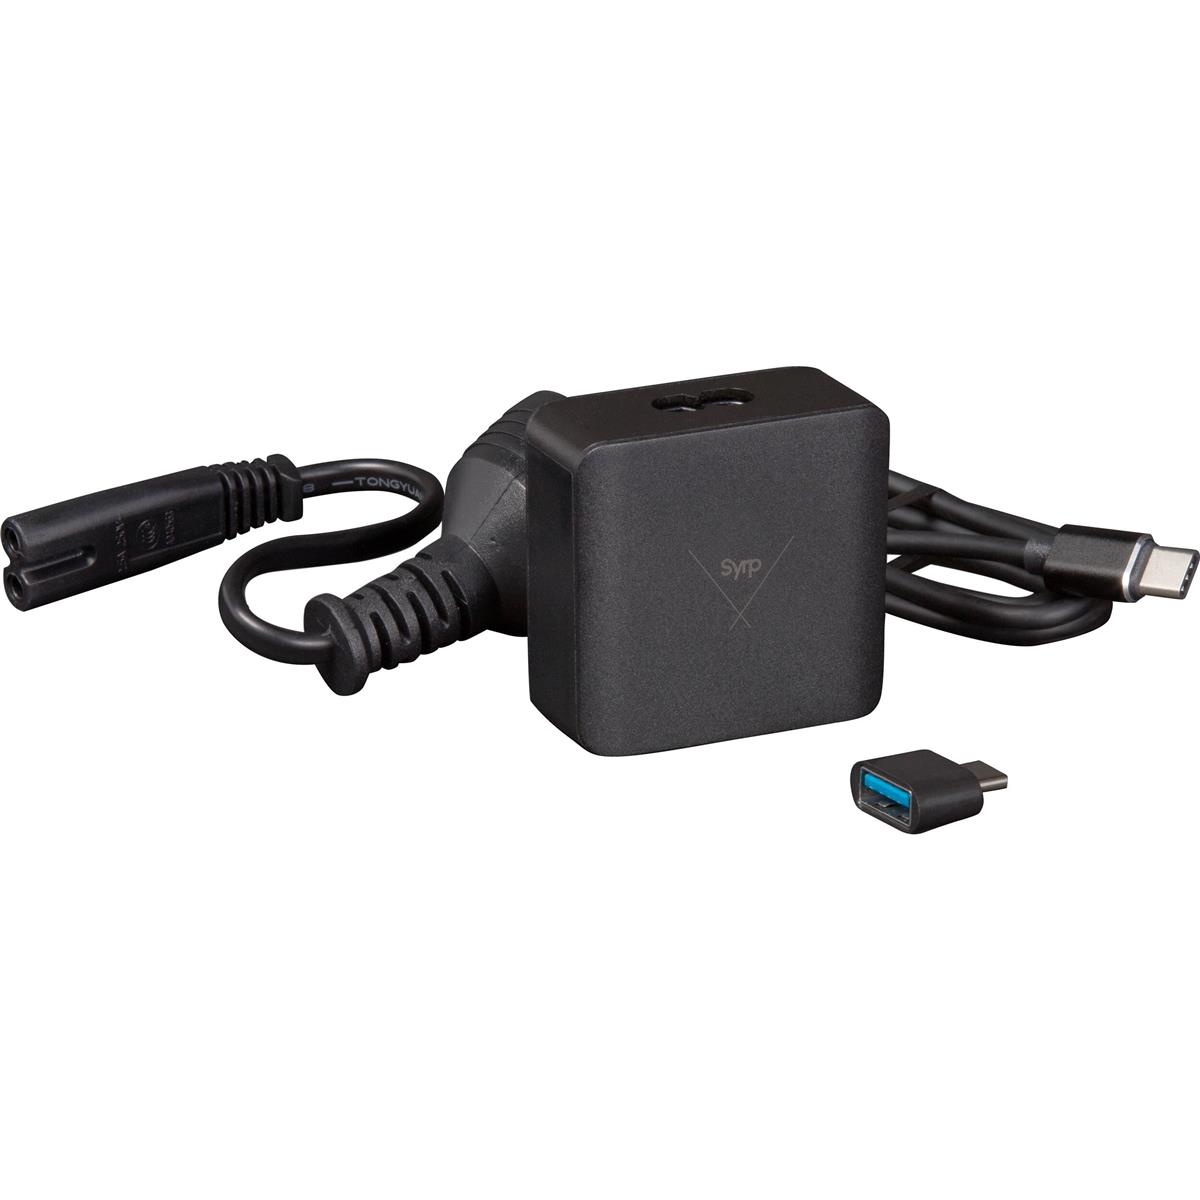 Image of Syrp Genie II 18W International Wall Charger